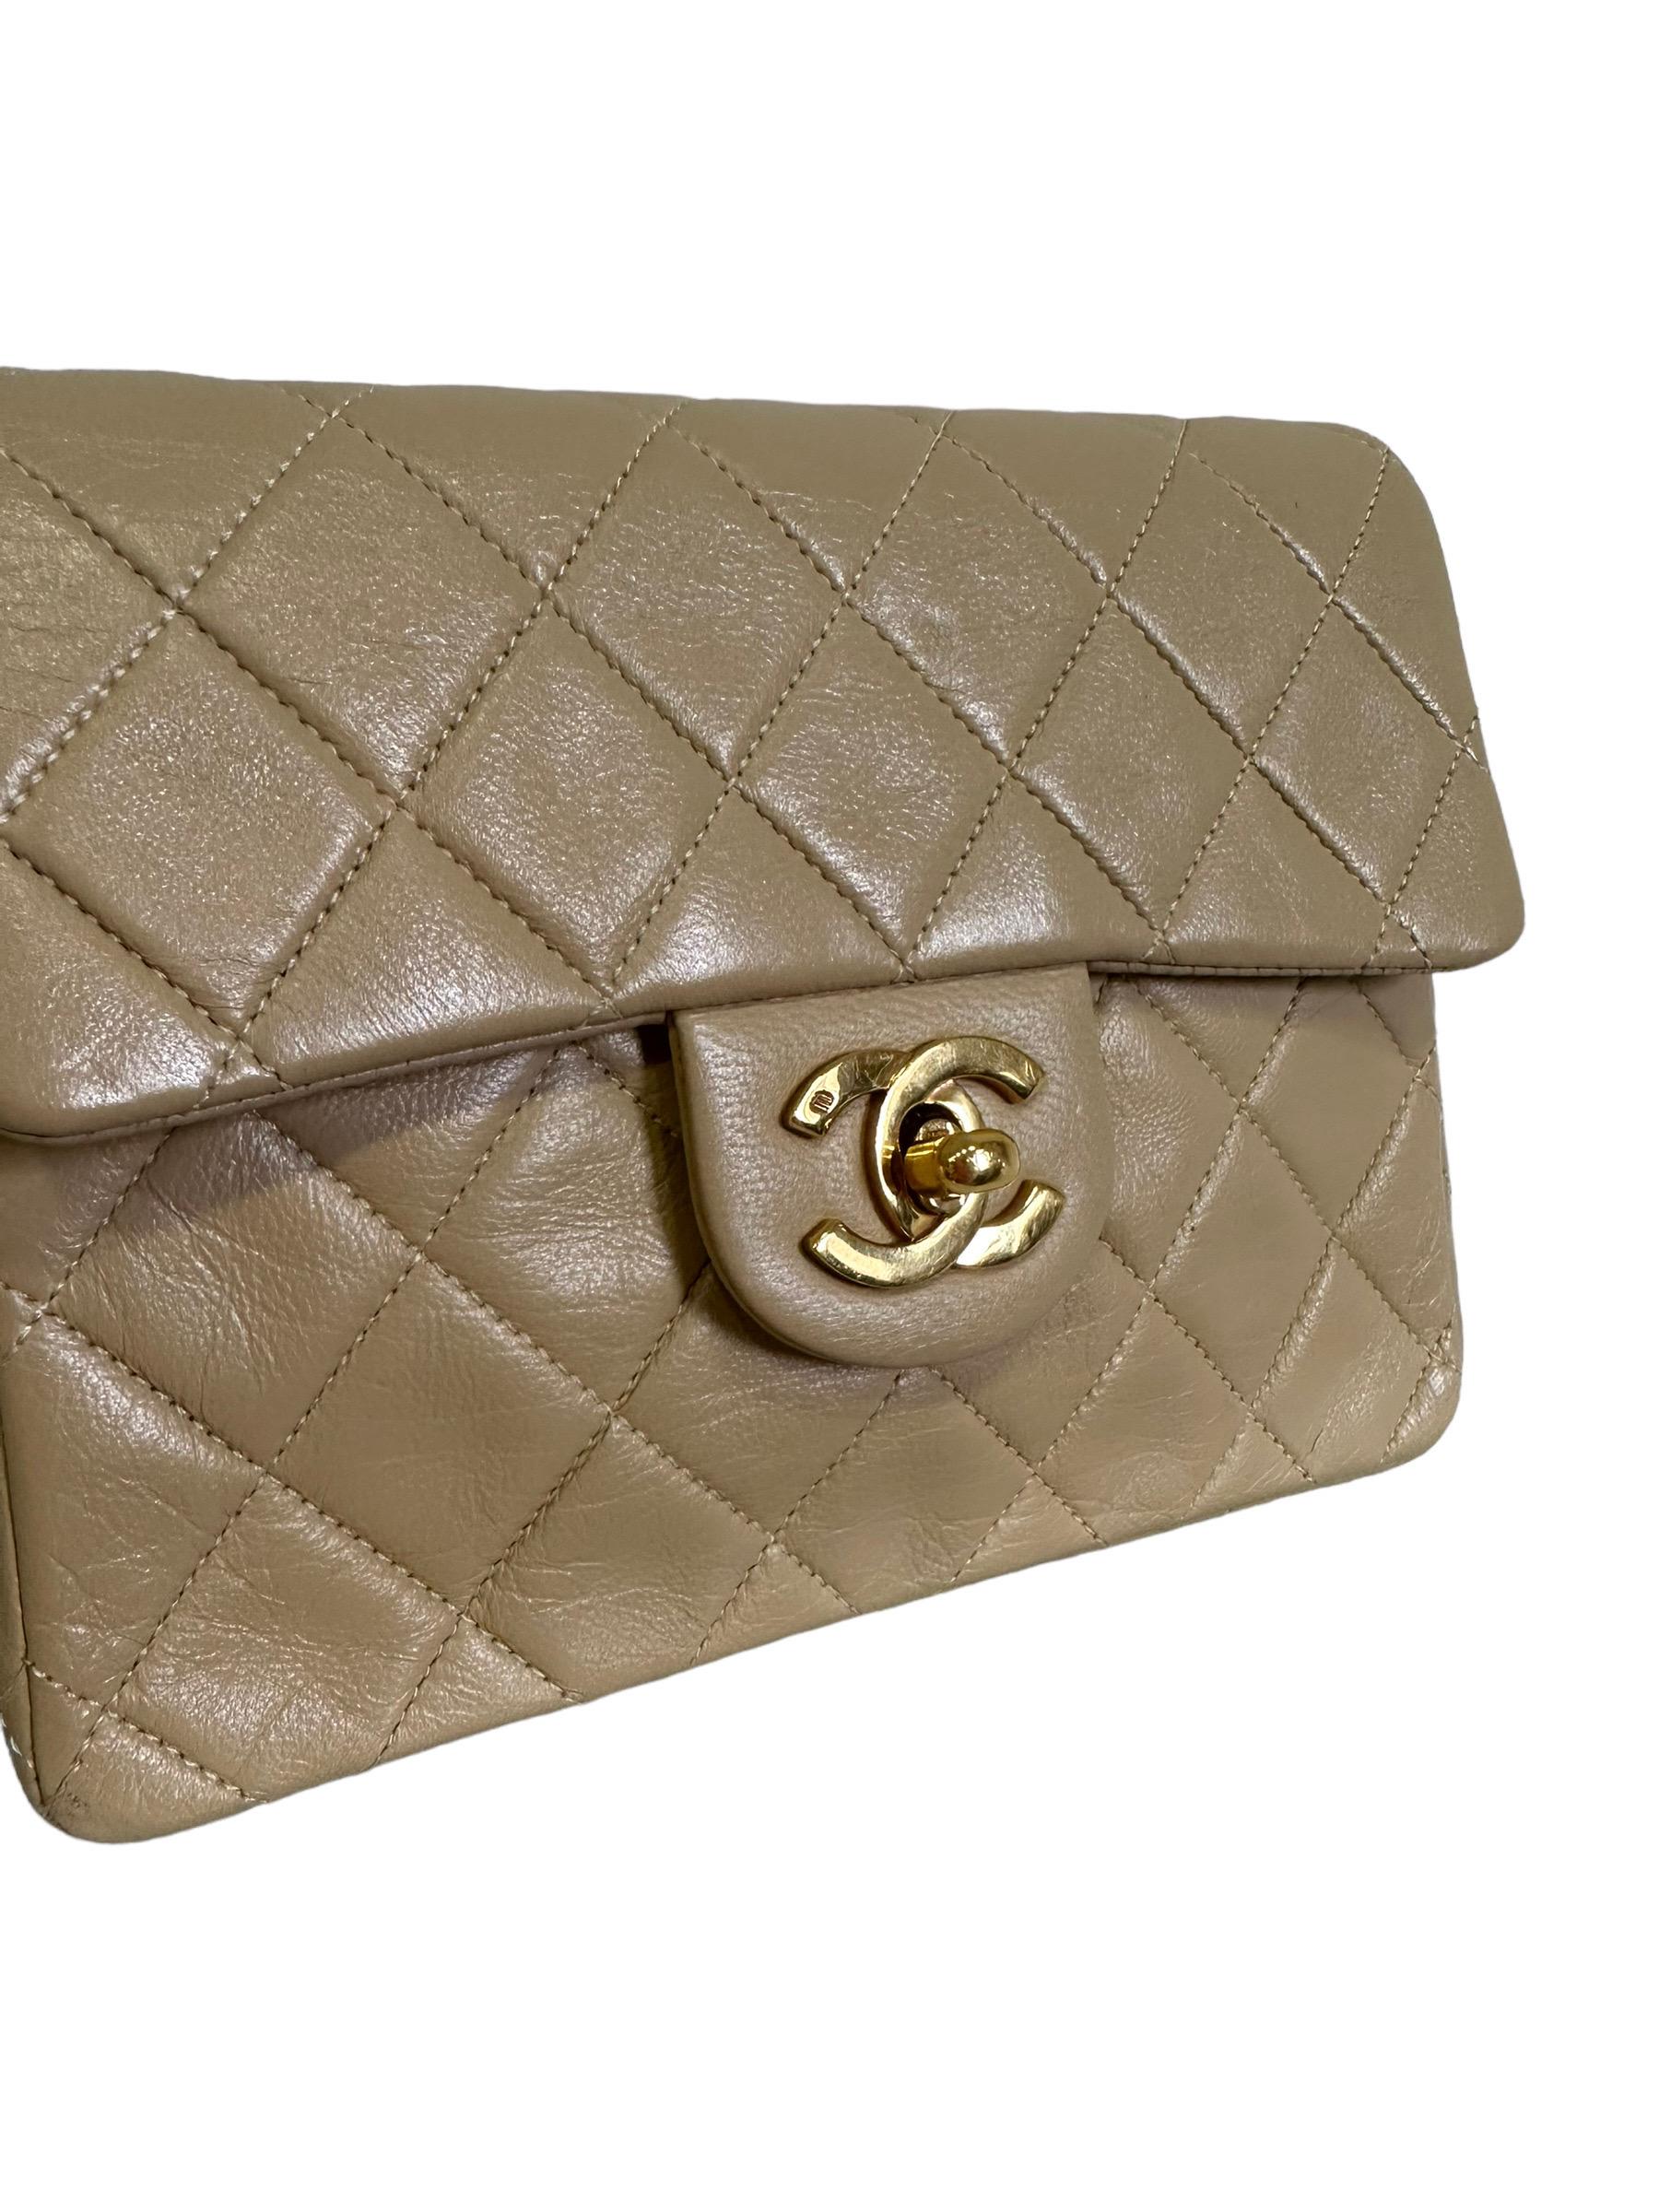 Chanel shoulder bag, vintage Mini Flap model, made in beige leather with gold hardware. Equipped with a flap with twist lock closure with CC logo, internally lined in beige leather, roomy for the essentials. Equipped with a shoulder strap in leather